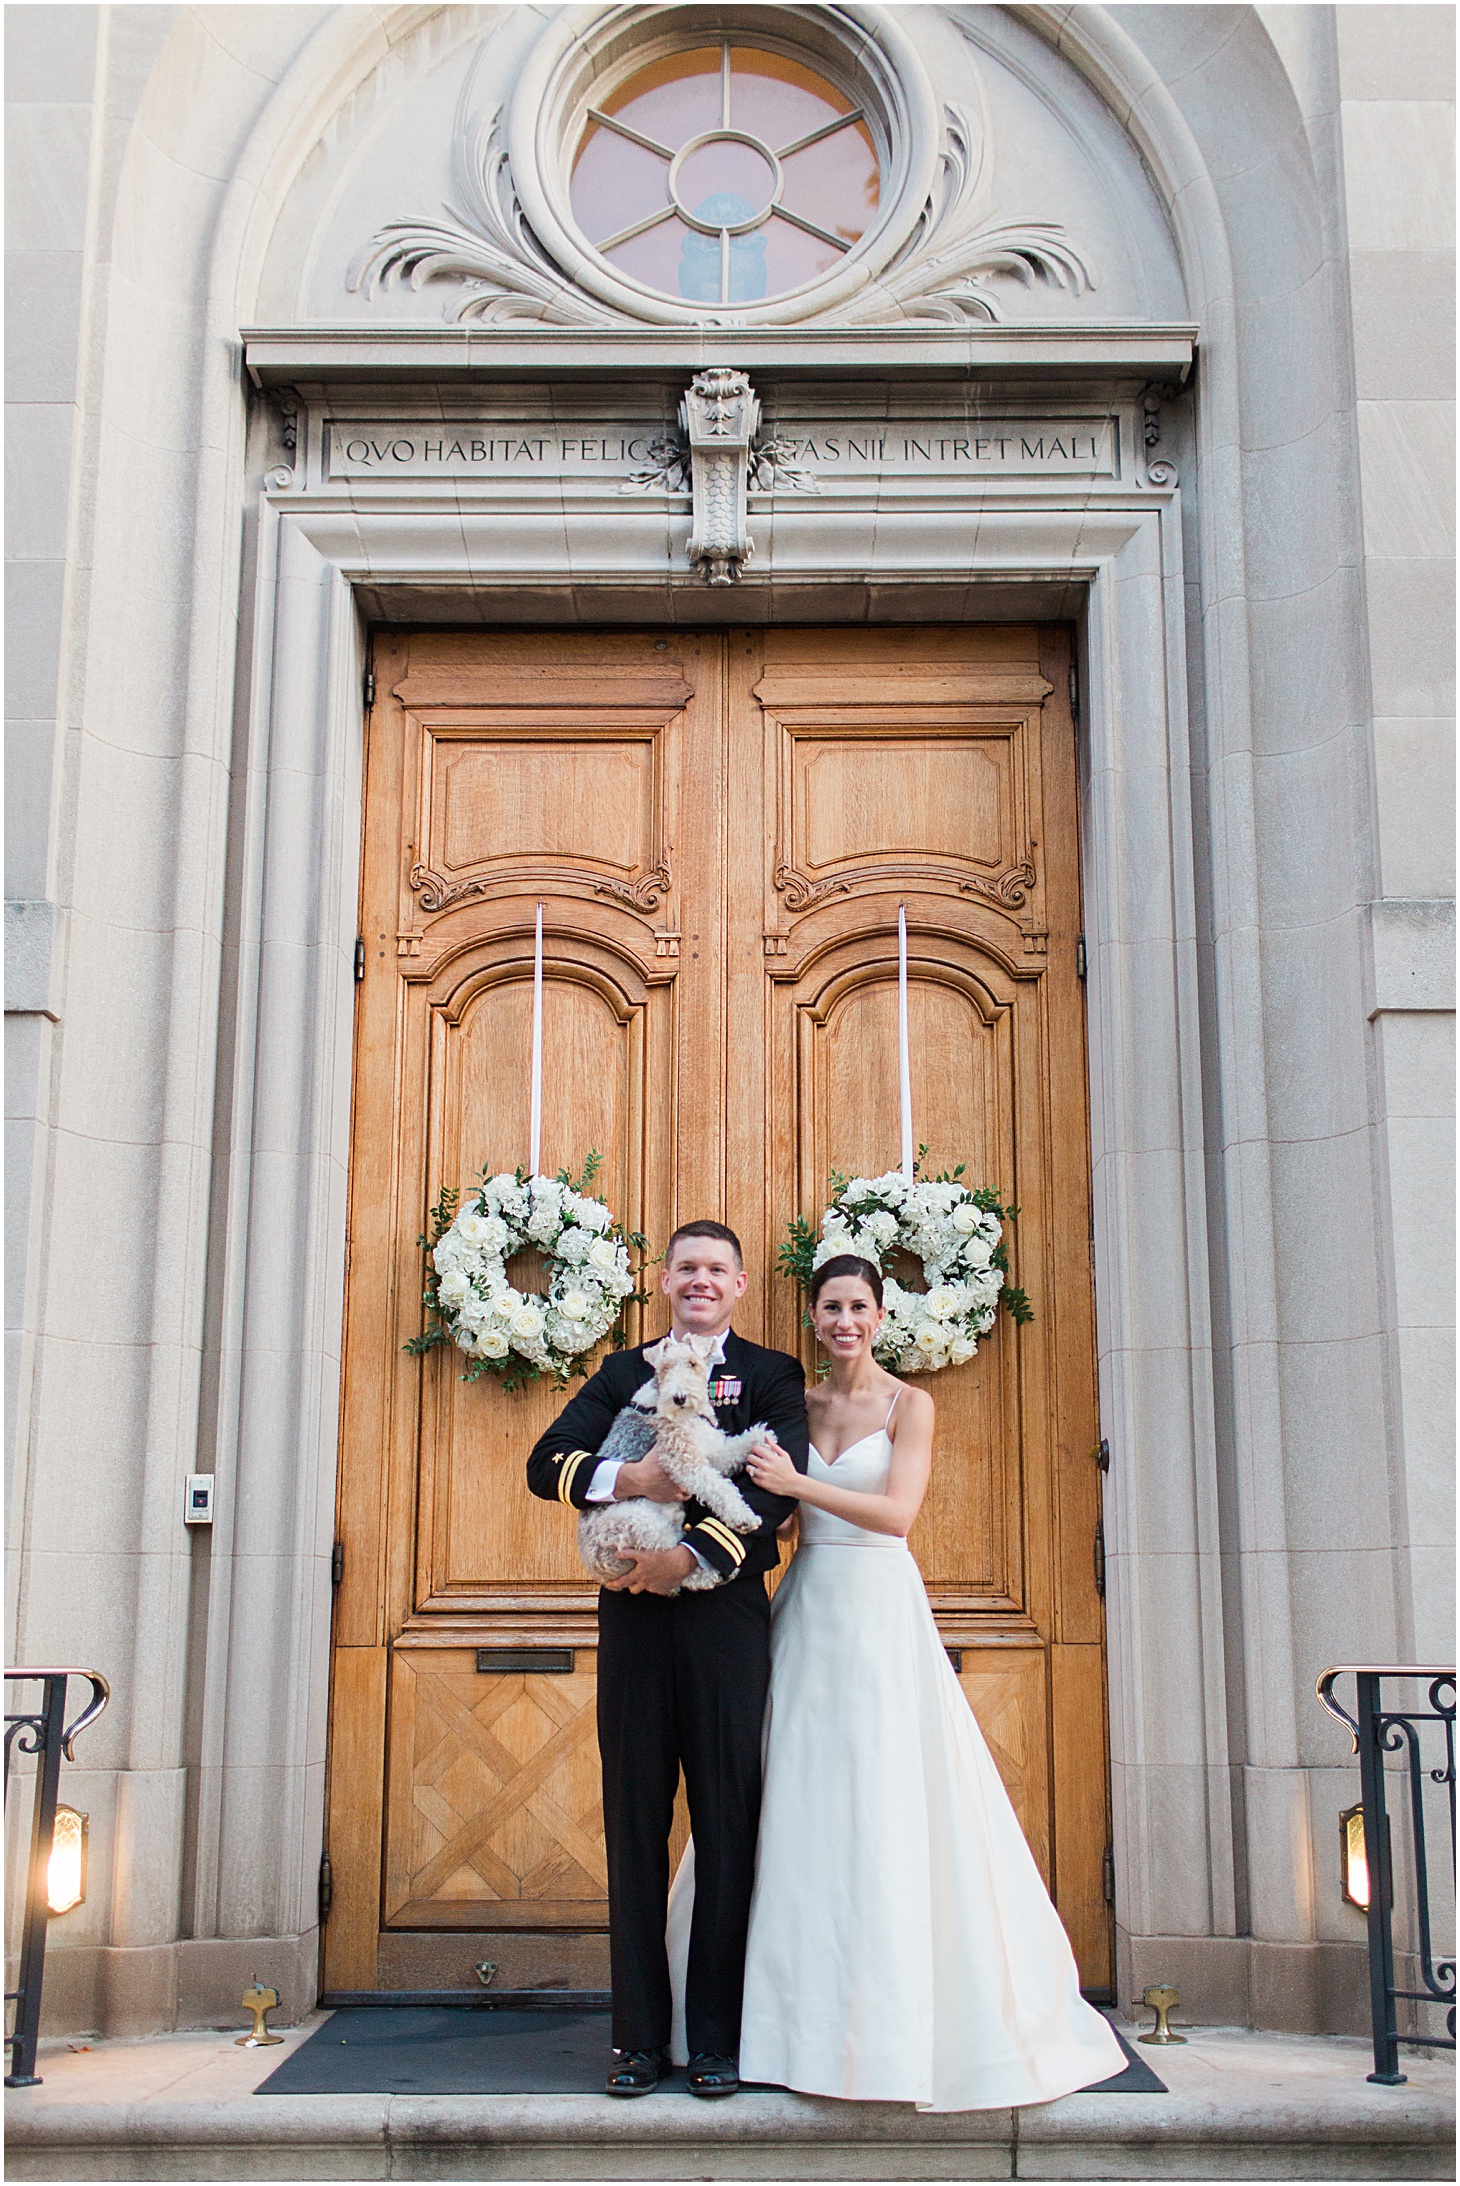 Bride & Groom with dog - A Thoroughly Washingtonian Wedding at Meridian House in DC by Sarah Bradshaw 